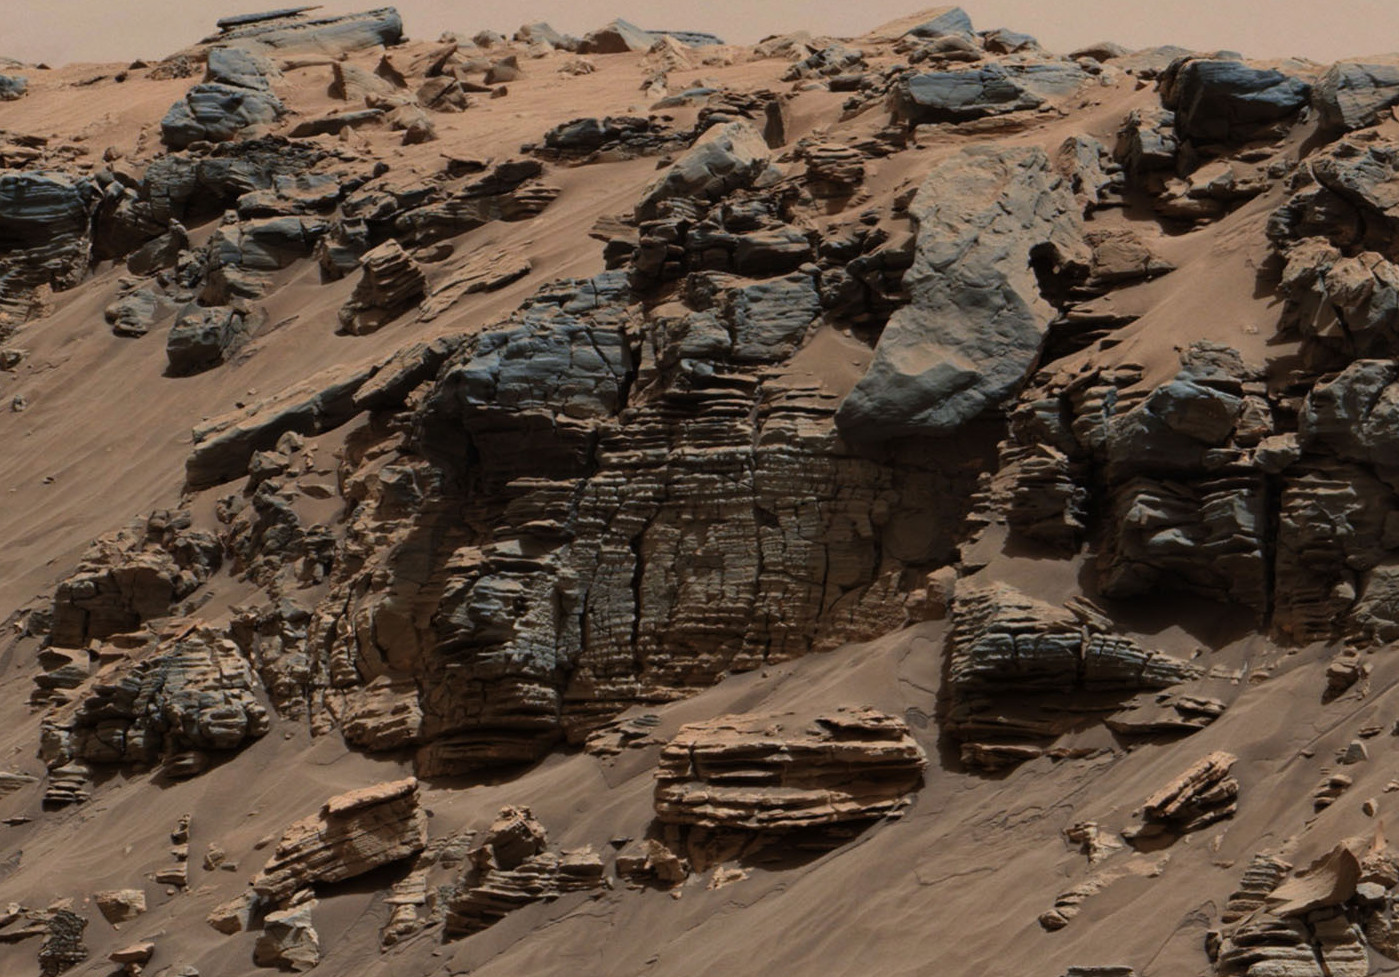 Layers of rock in this image taken at the edge of "Hidden Valley"...